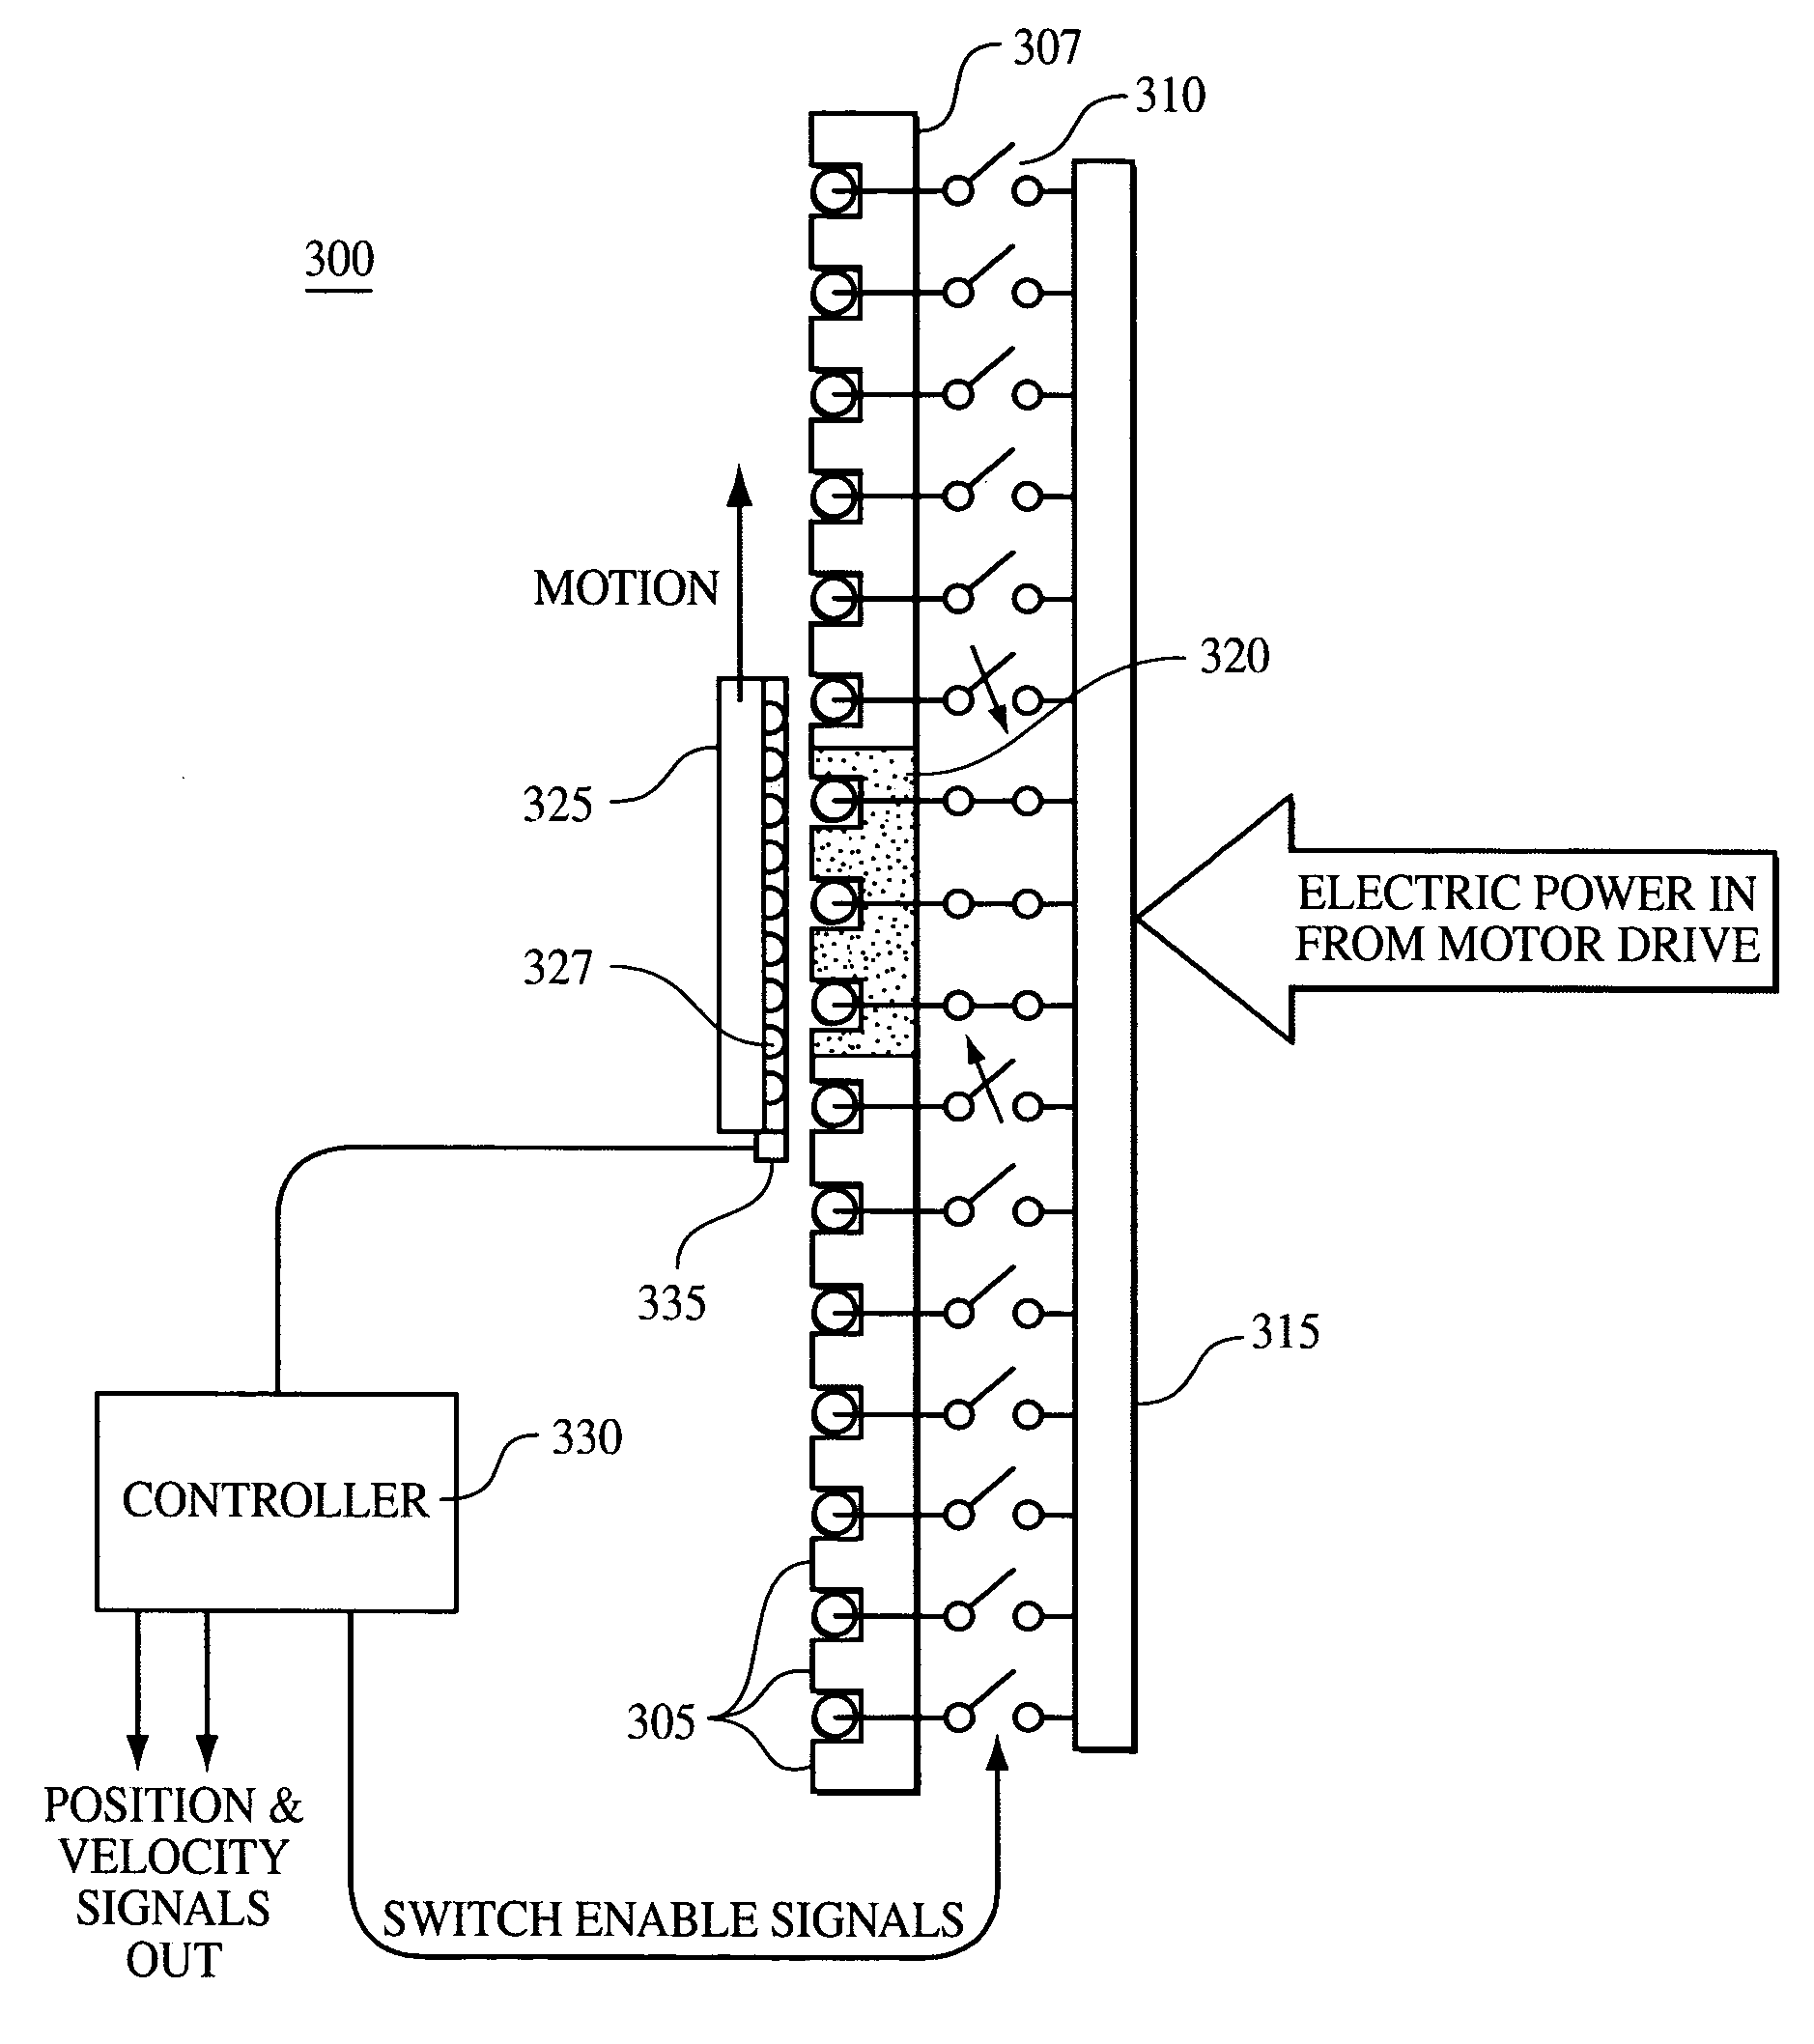 Modular linear electric motor with limited stator excitation zone and stator gap compensation